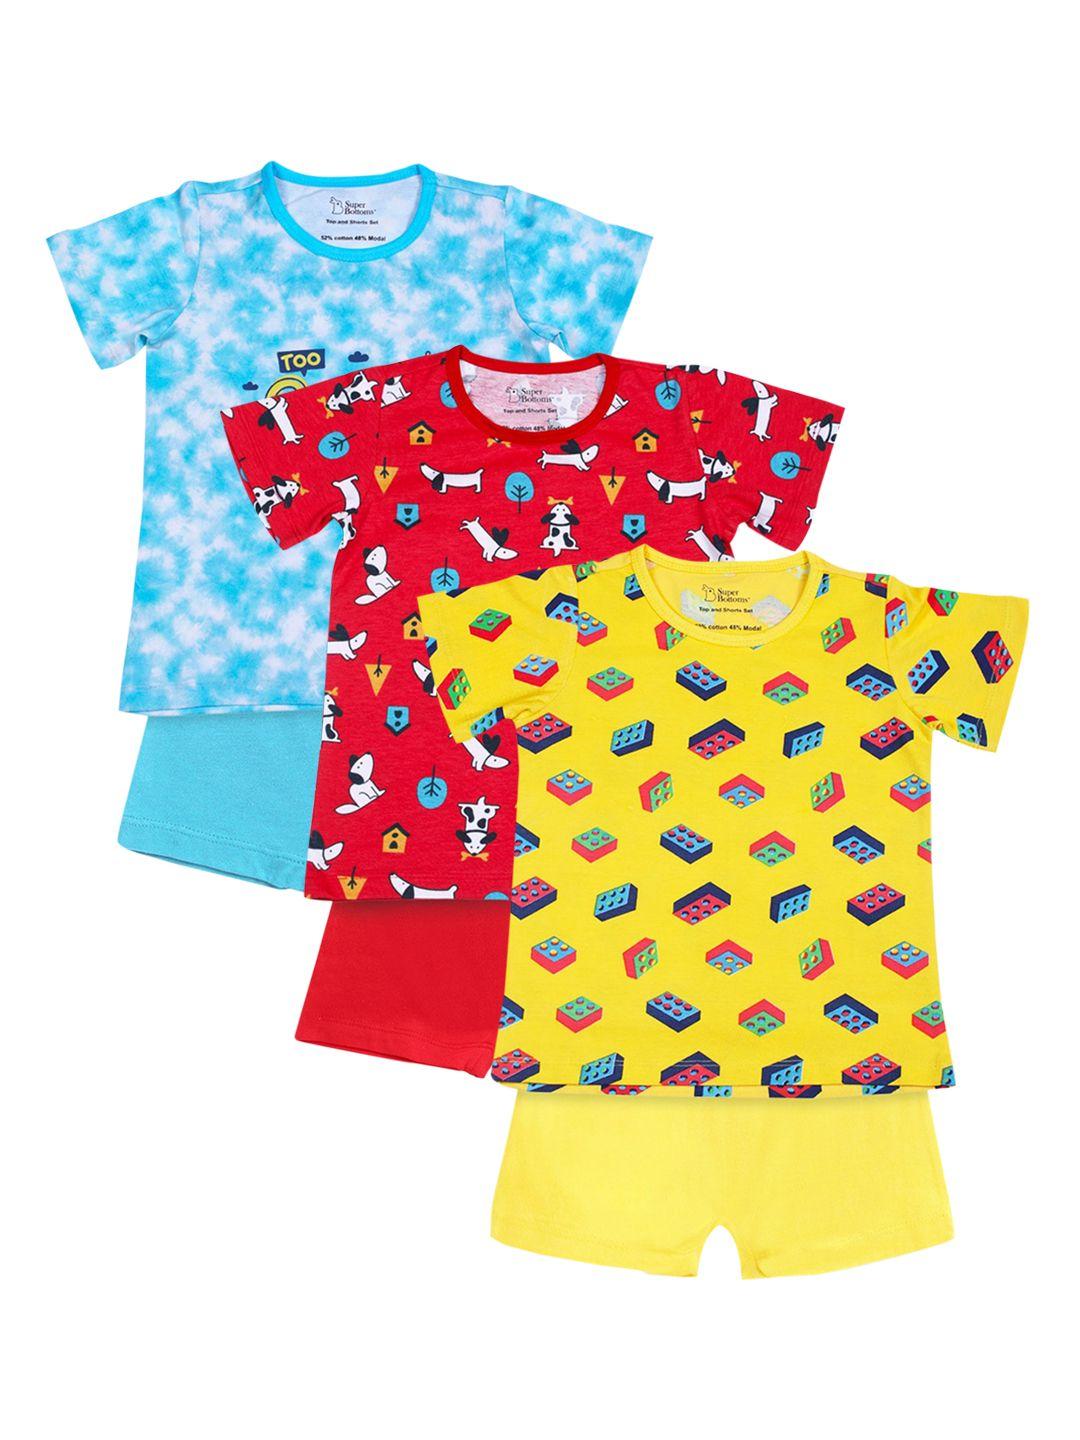 superbottoms kids pack of 3 printed cotton sustainable clothing set